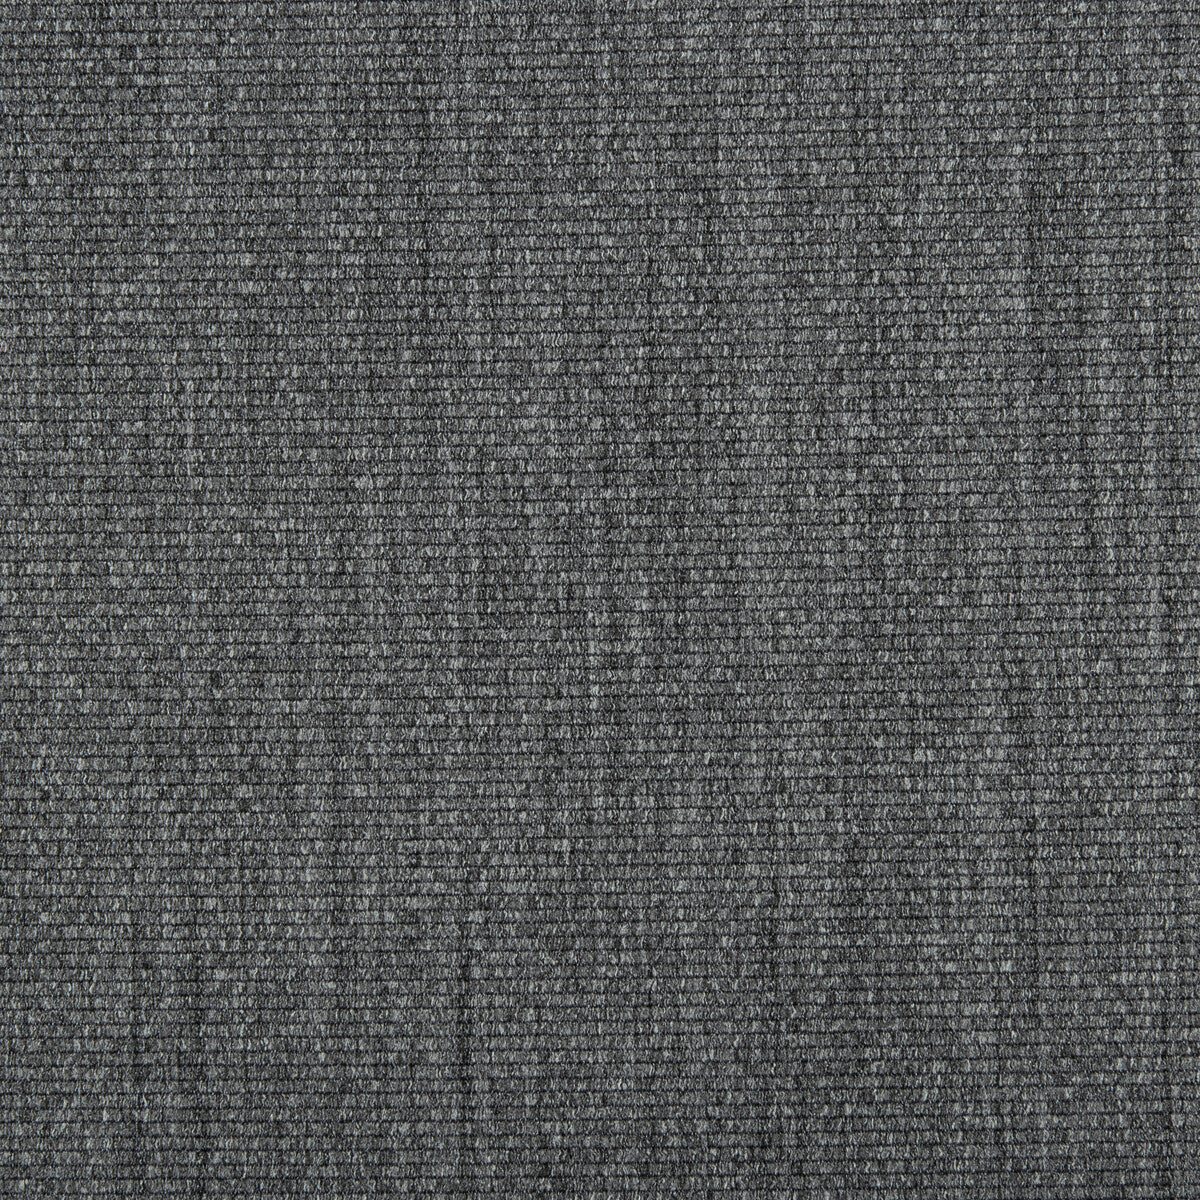 Kravet Contract fabric in 4646-521 color - pattern 4646.521.0 - by Kravet Contract